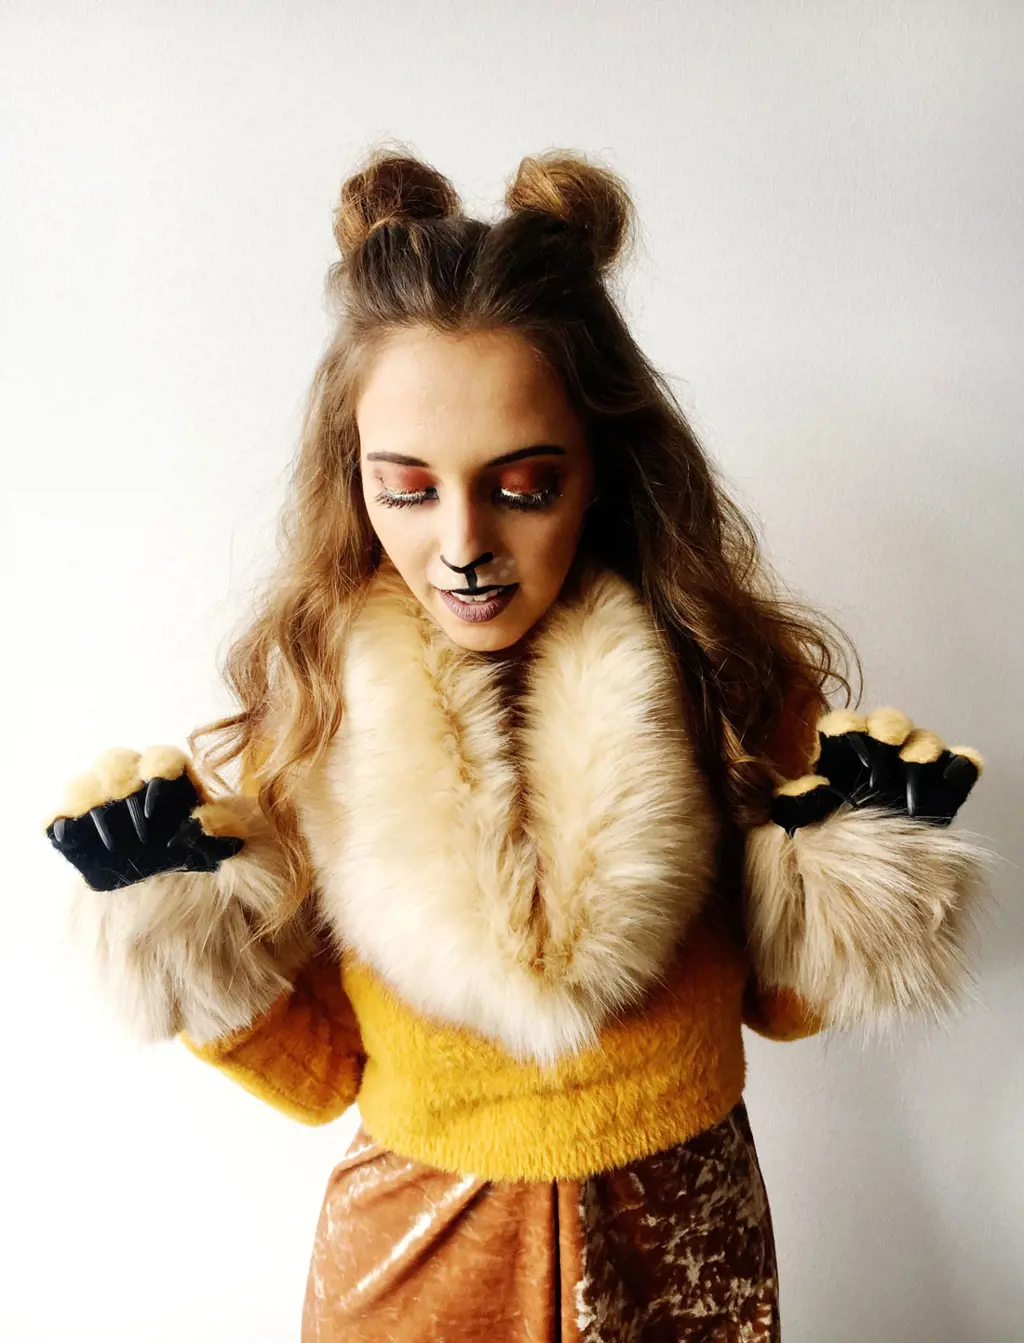 Lively And Creative: 8 Great Ideas For Dressing Up As Characters That ...